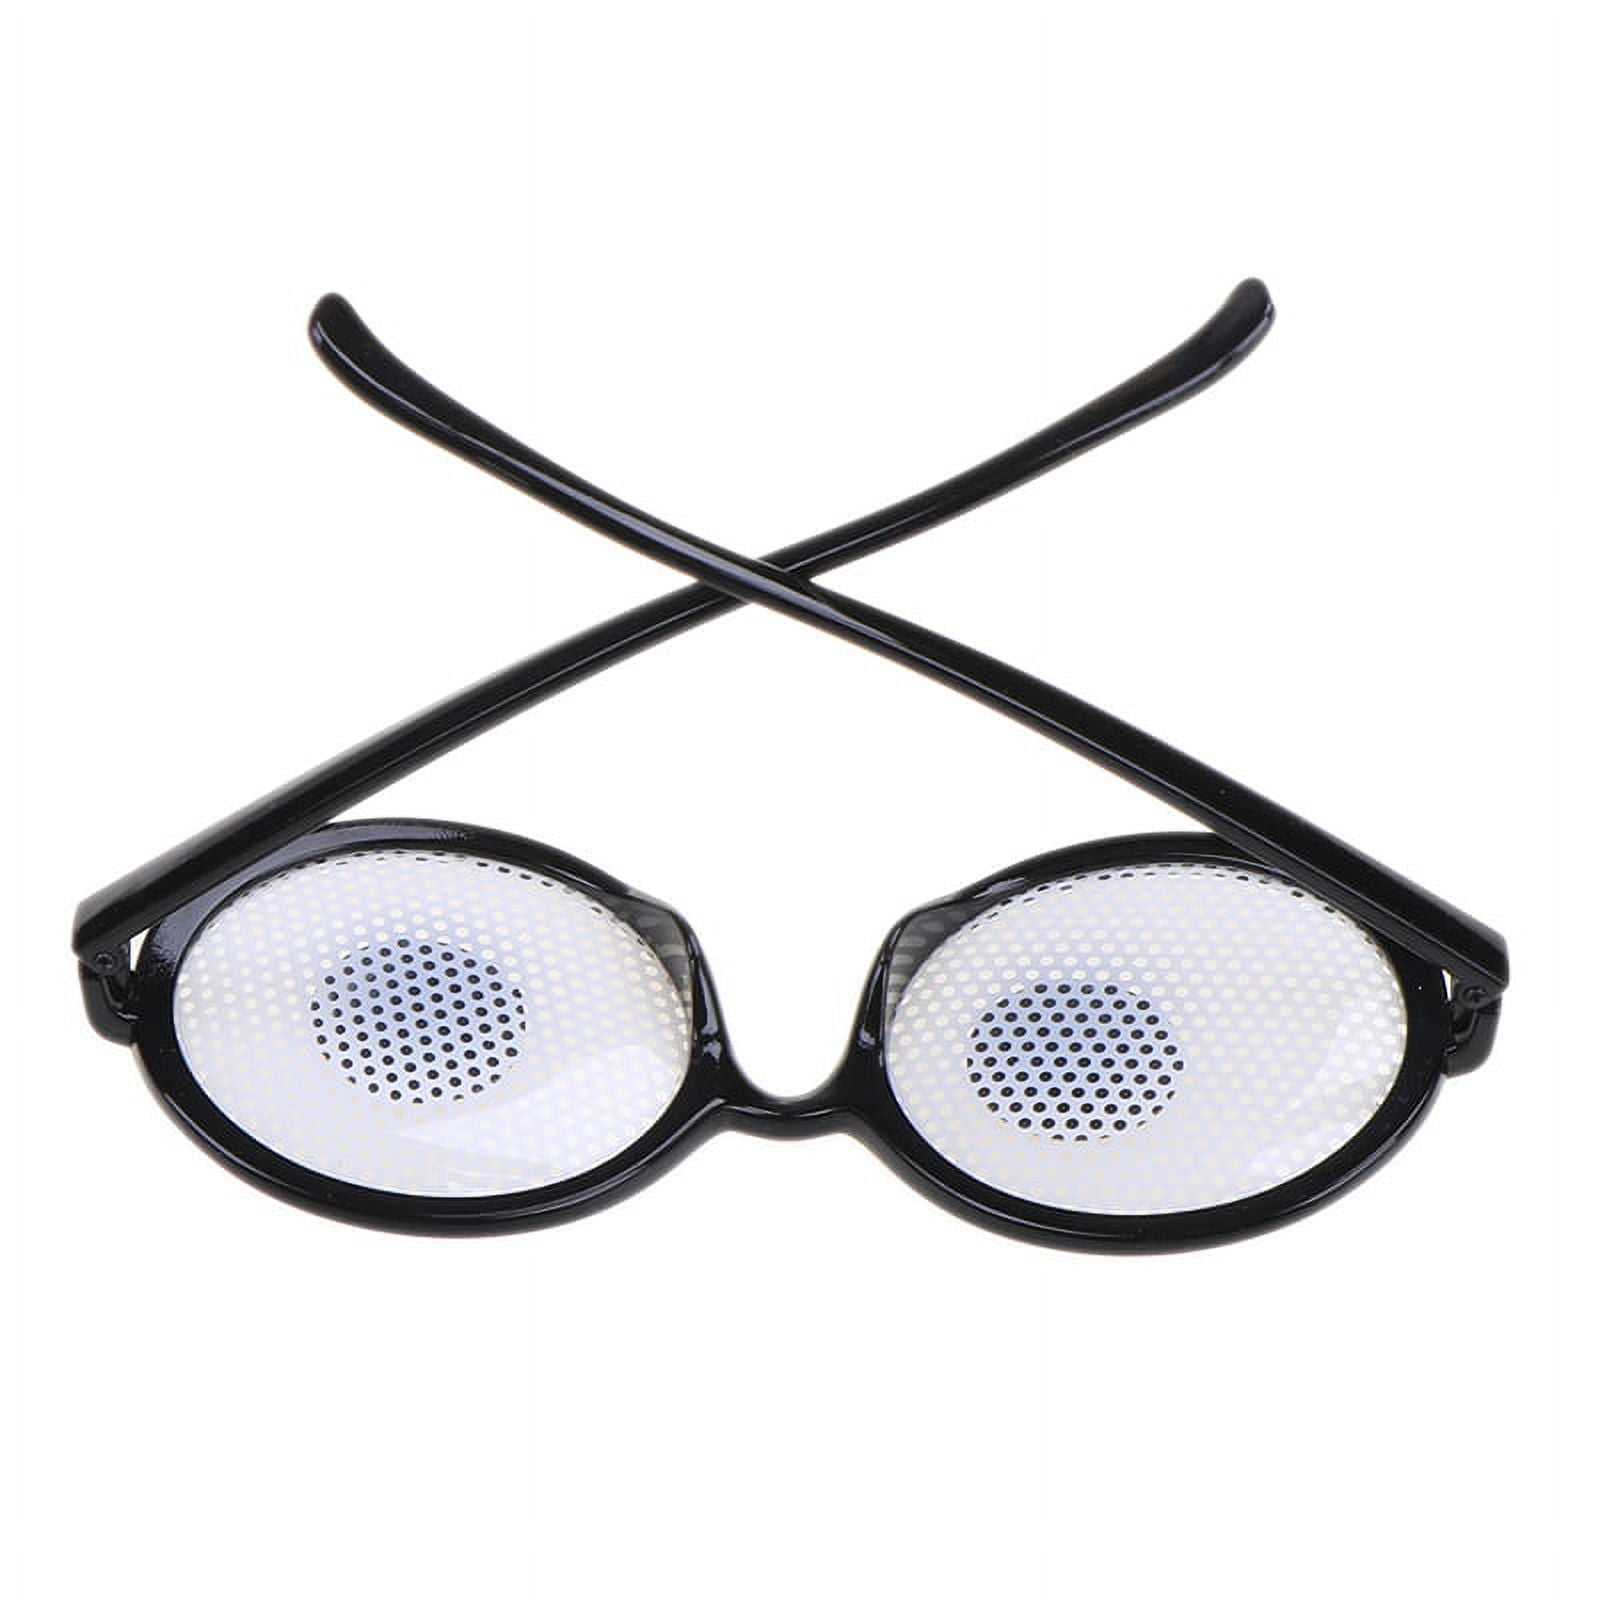 ZAKVOOR 10 Pieces Funny Googly Eyes Glasses Novelty Shaking Giant Googly  Eyes